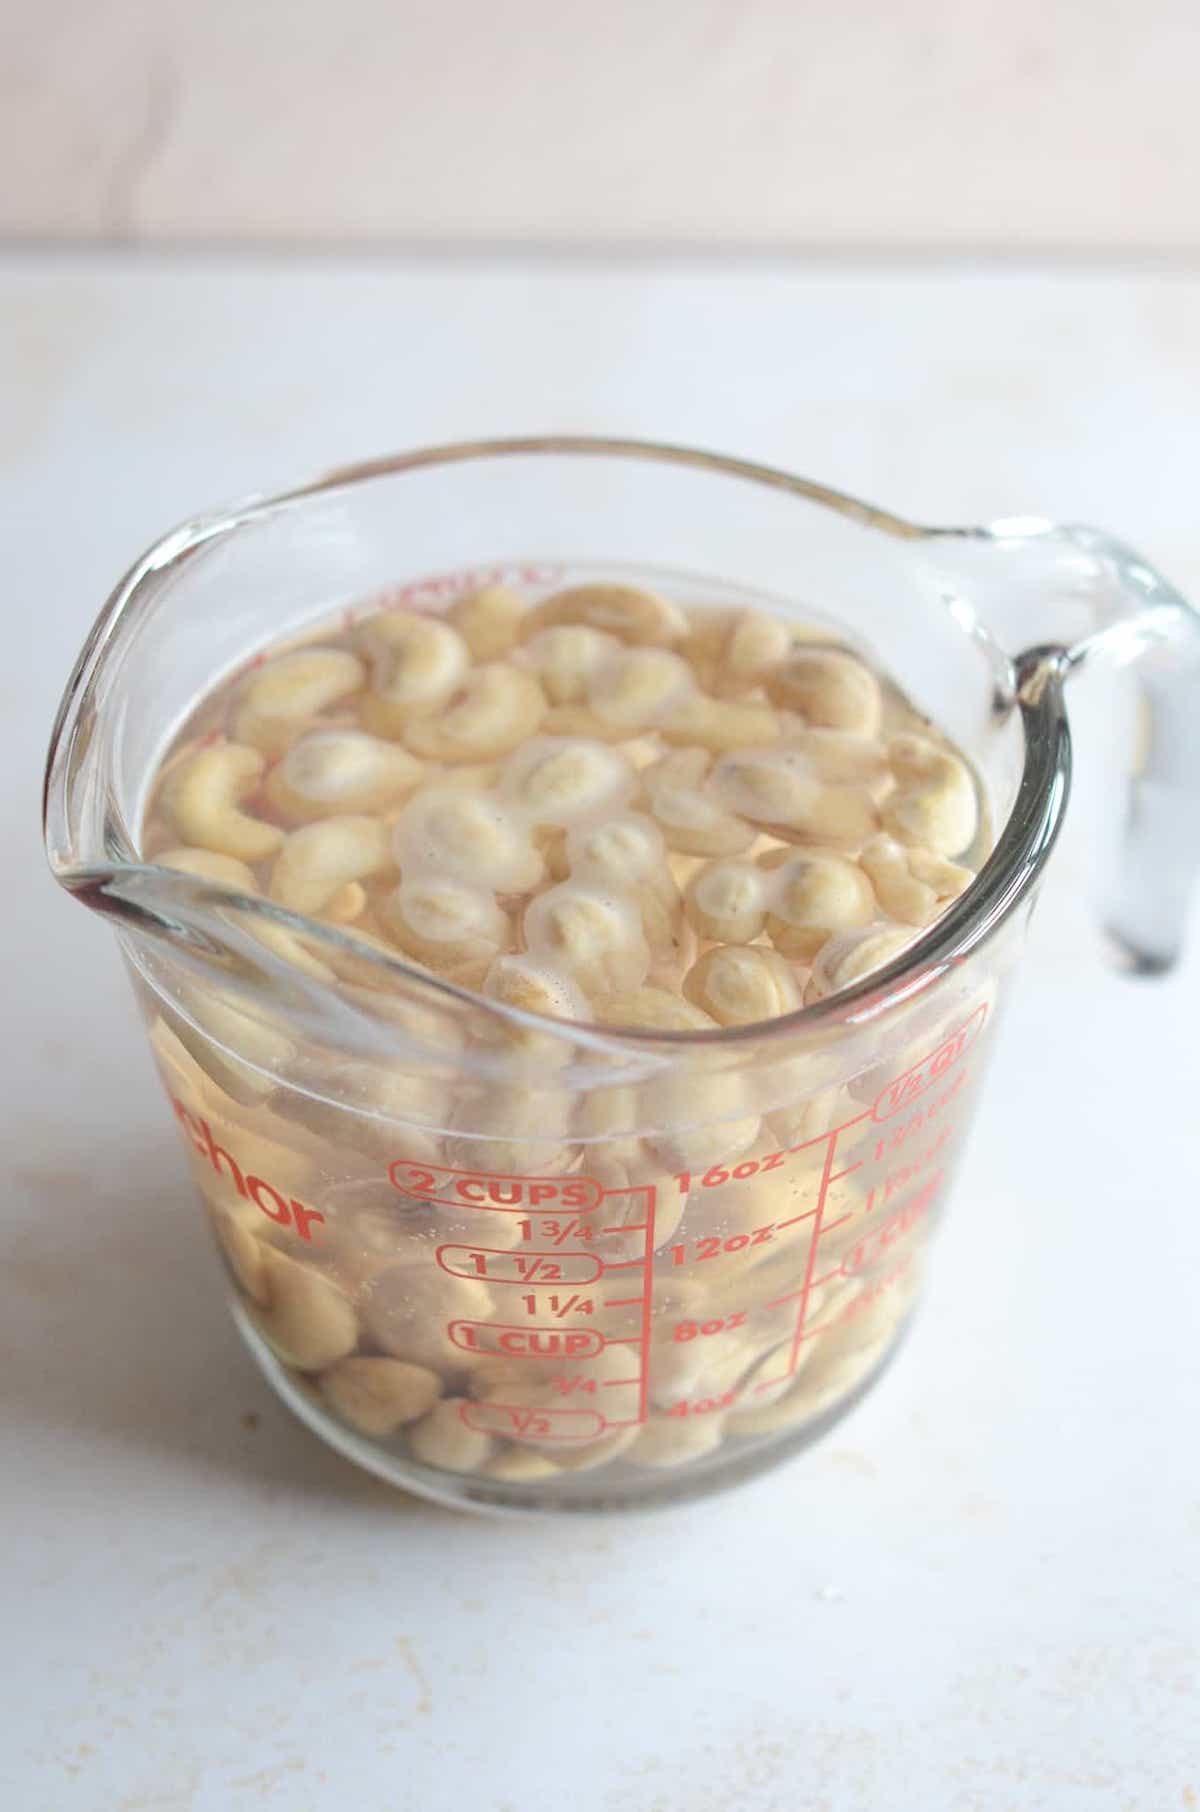 This is a photo of cashews soaking.